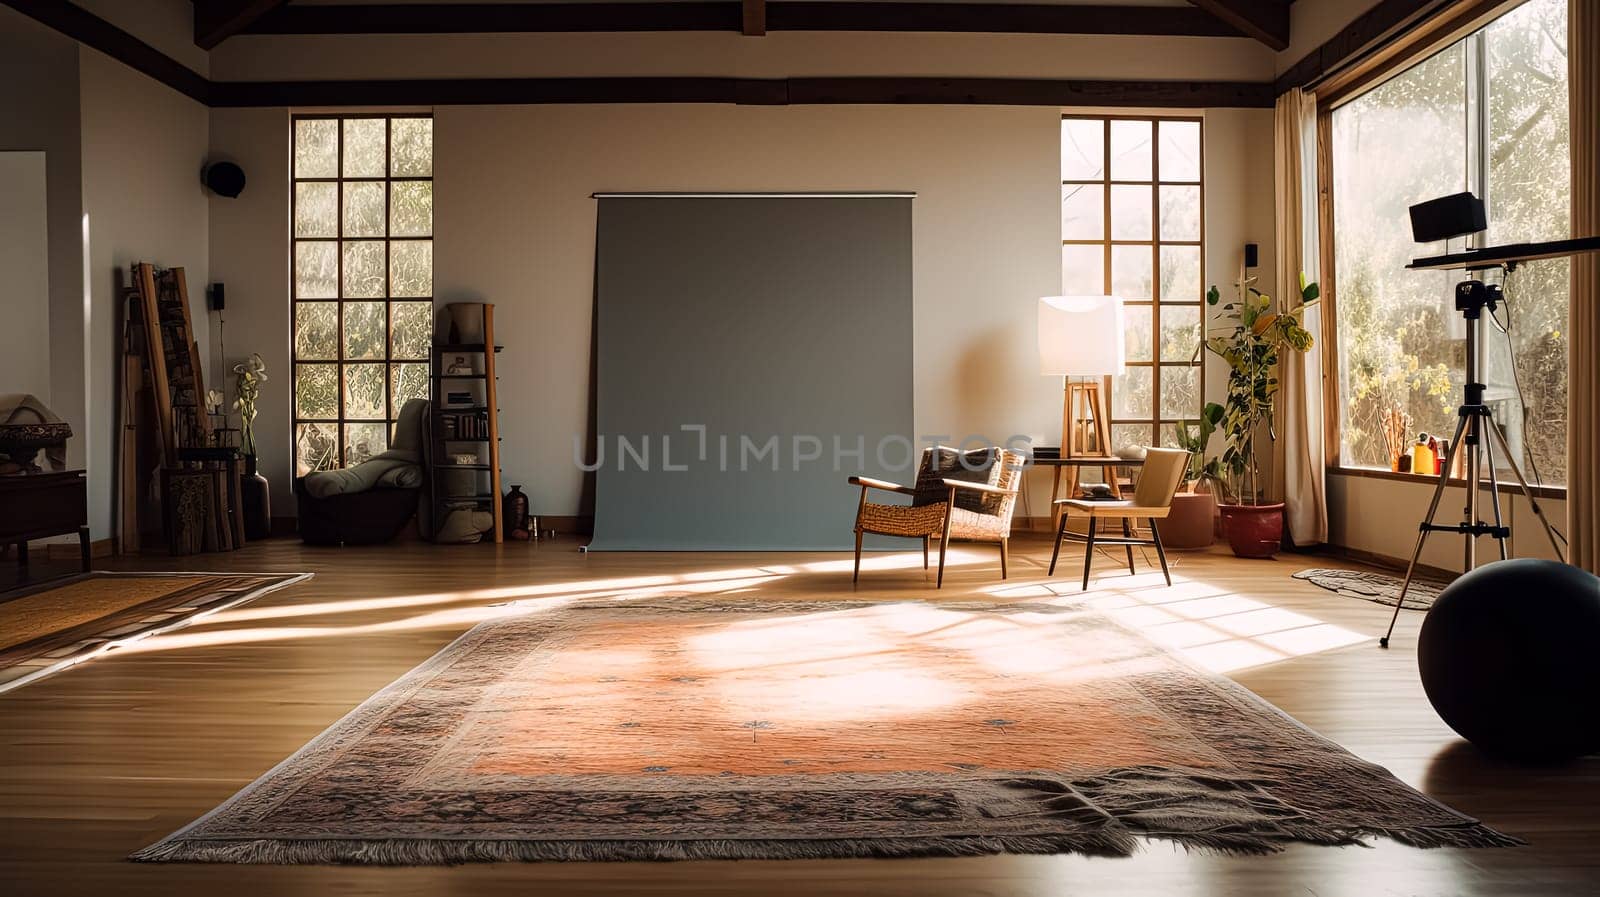 A large room with a rug on the floor and a chair in the middle. The room is empty and has a neutral color scheme